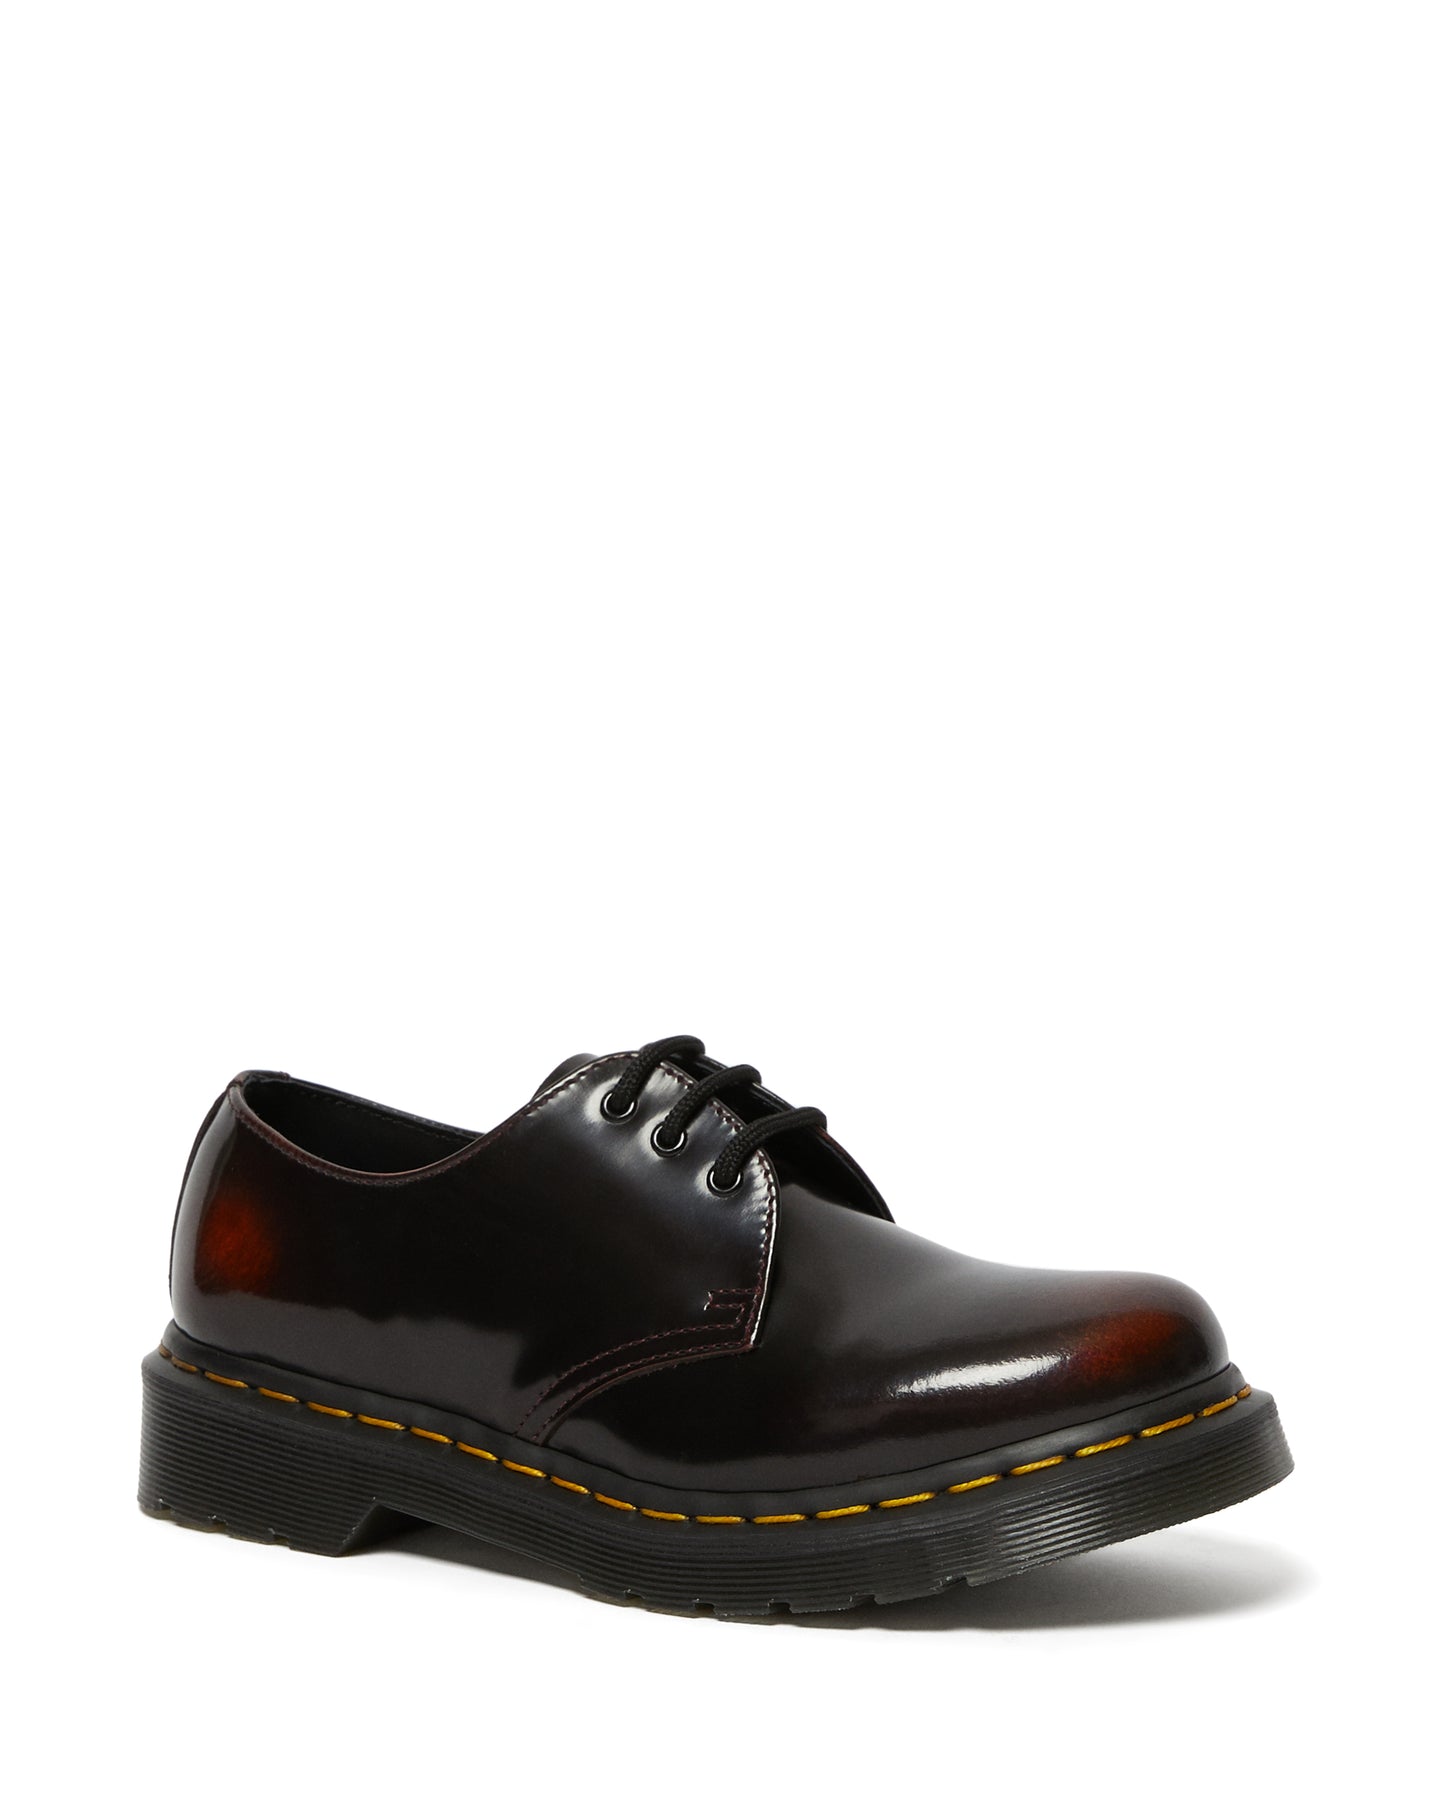 1461 WOMEN'S LEATHER ARCADIA OXFORD SHOES